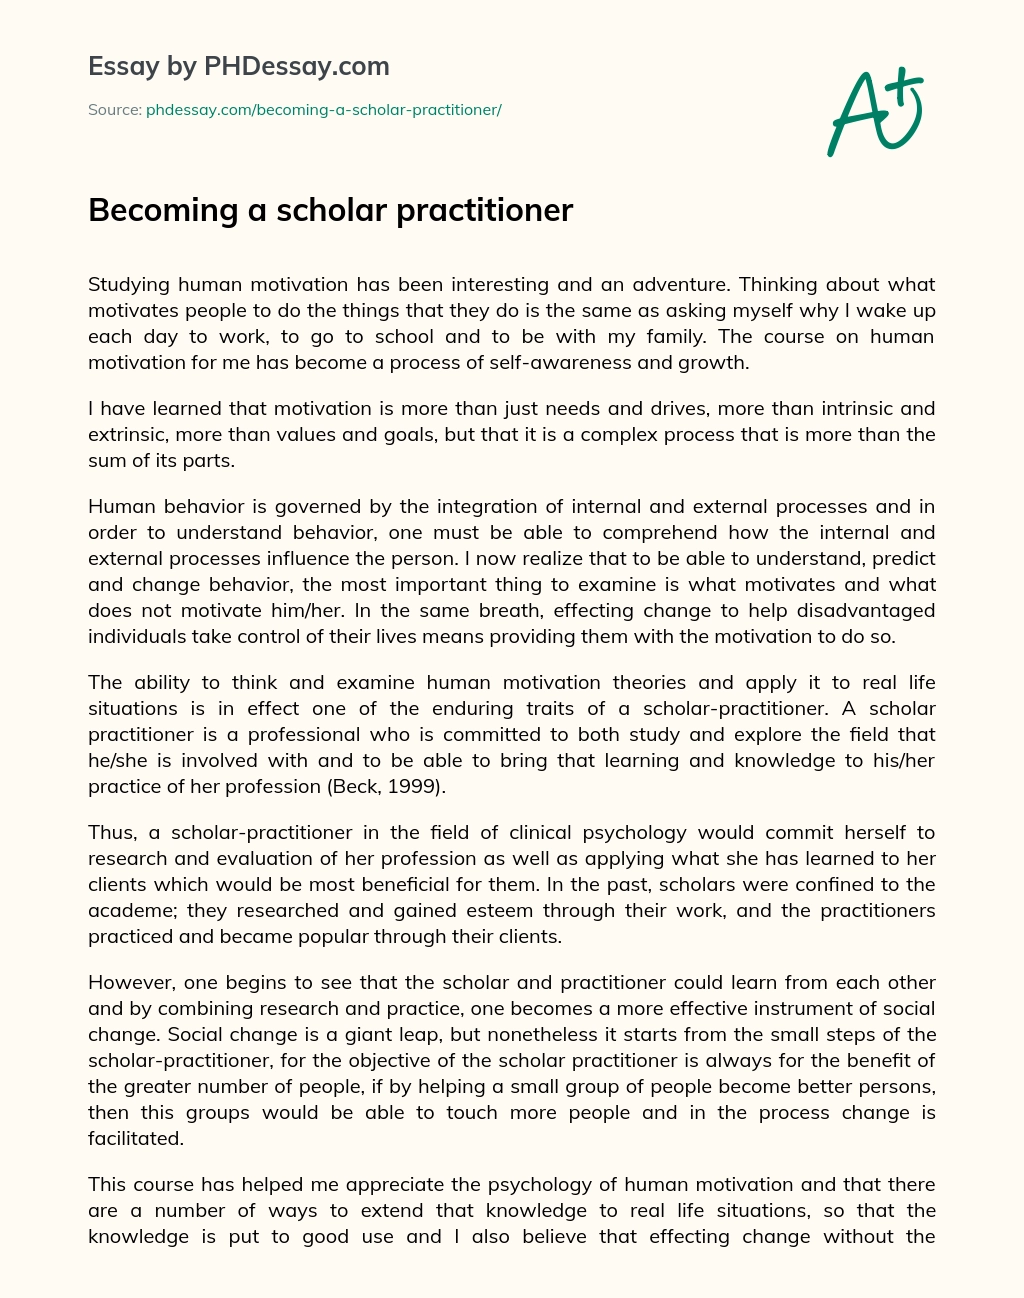 Becoming a scholar practitioner essay